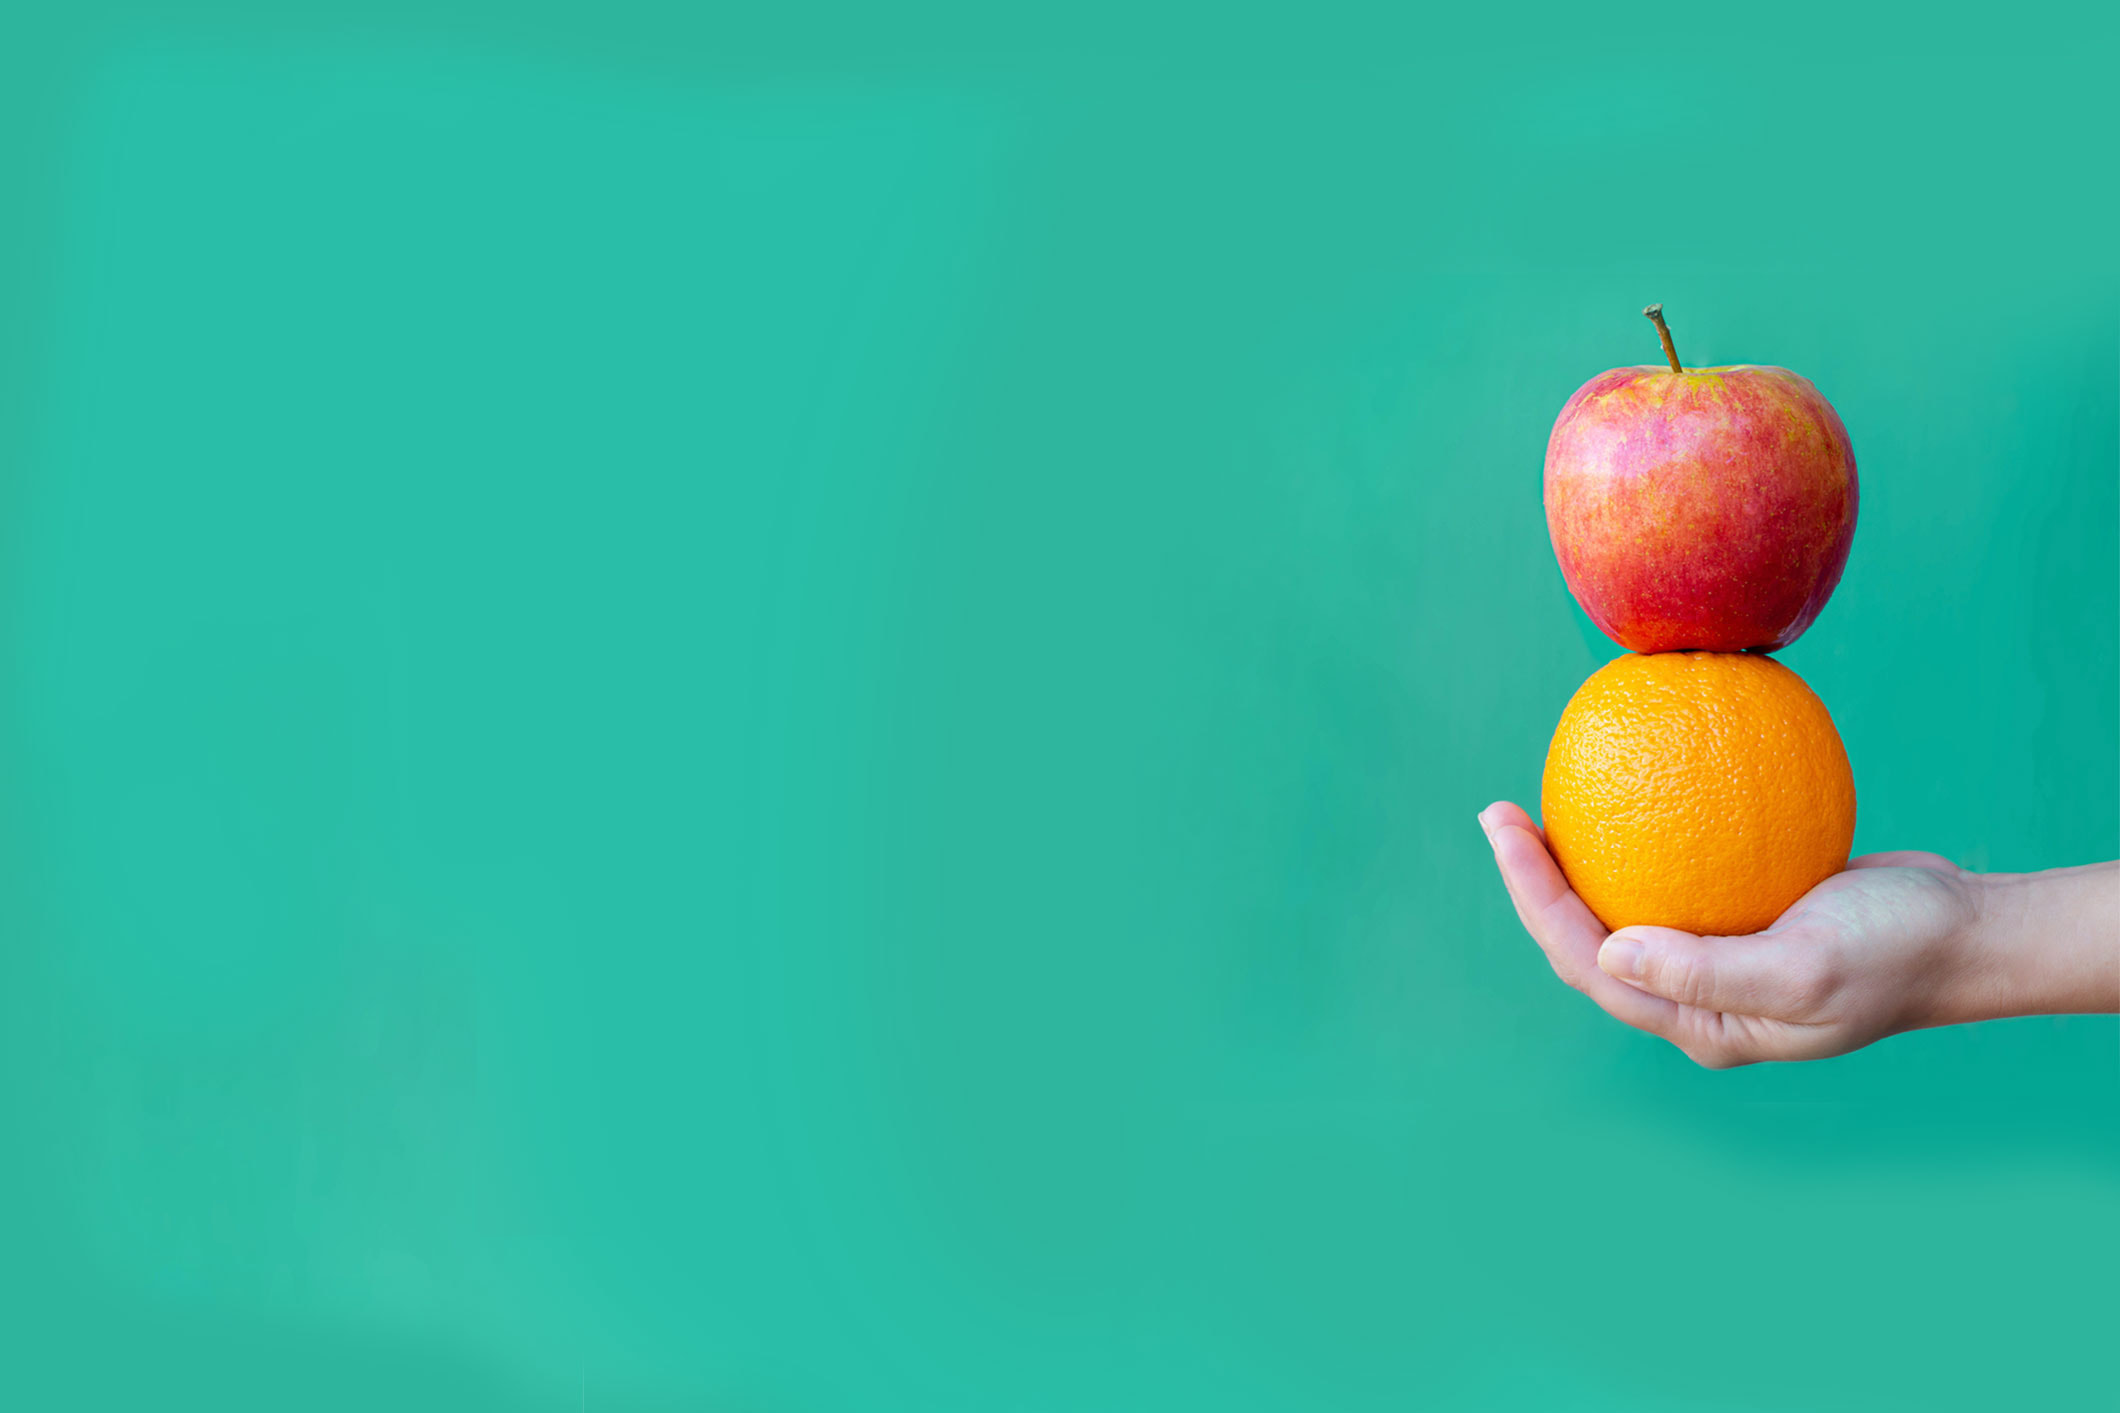 assumptions in marketing hand holding orange and apple